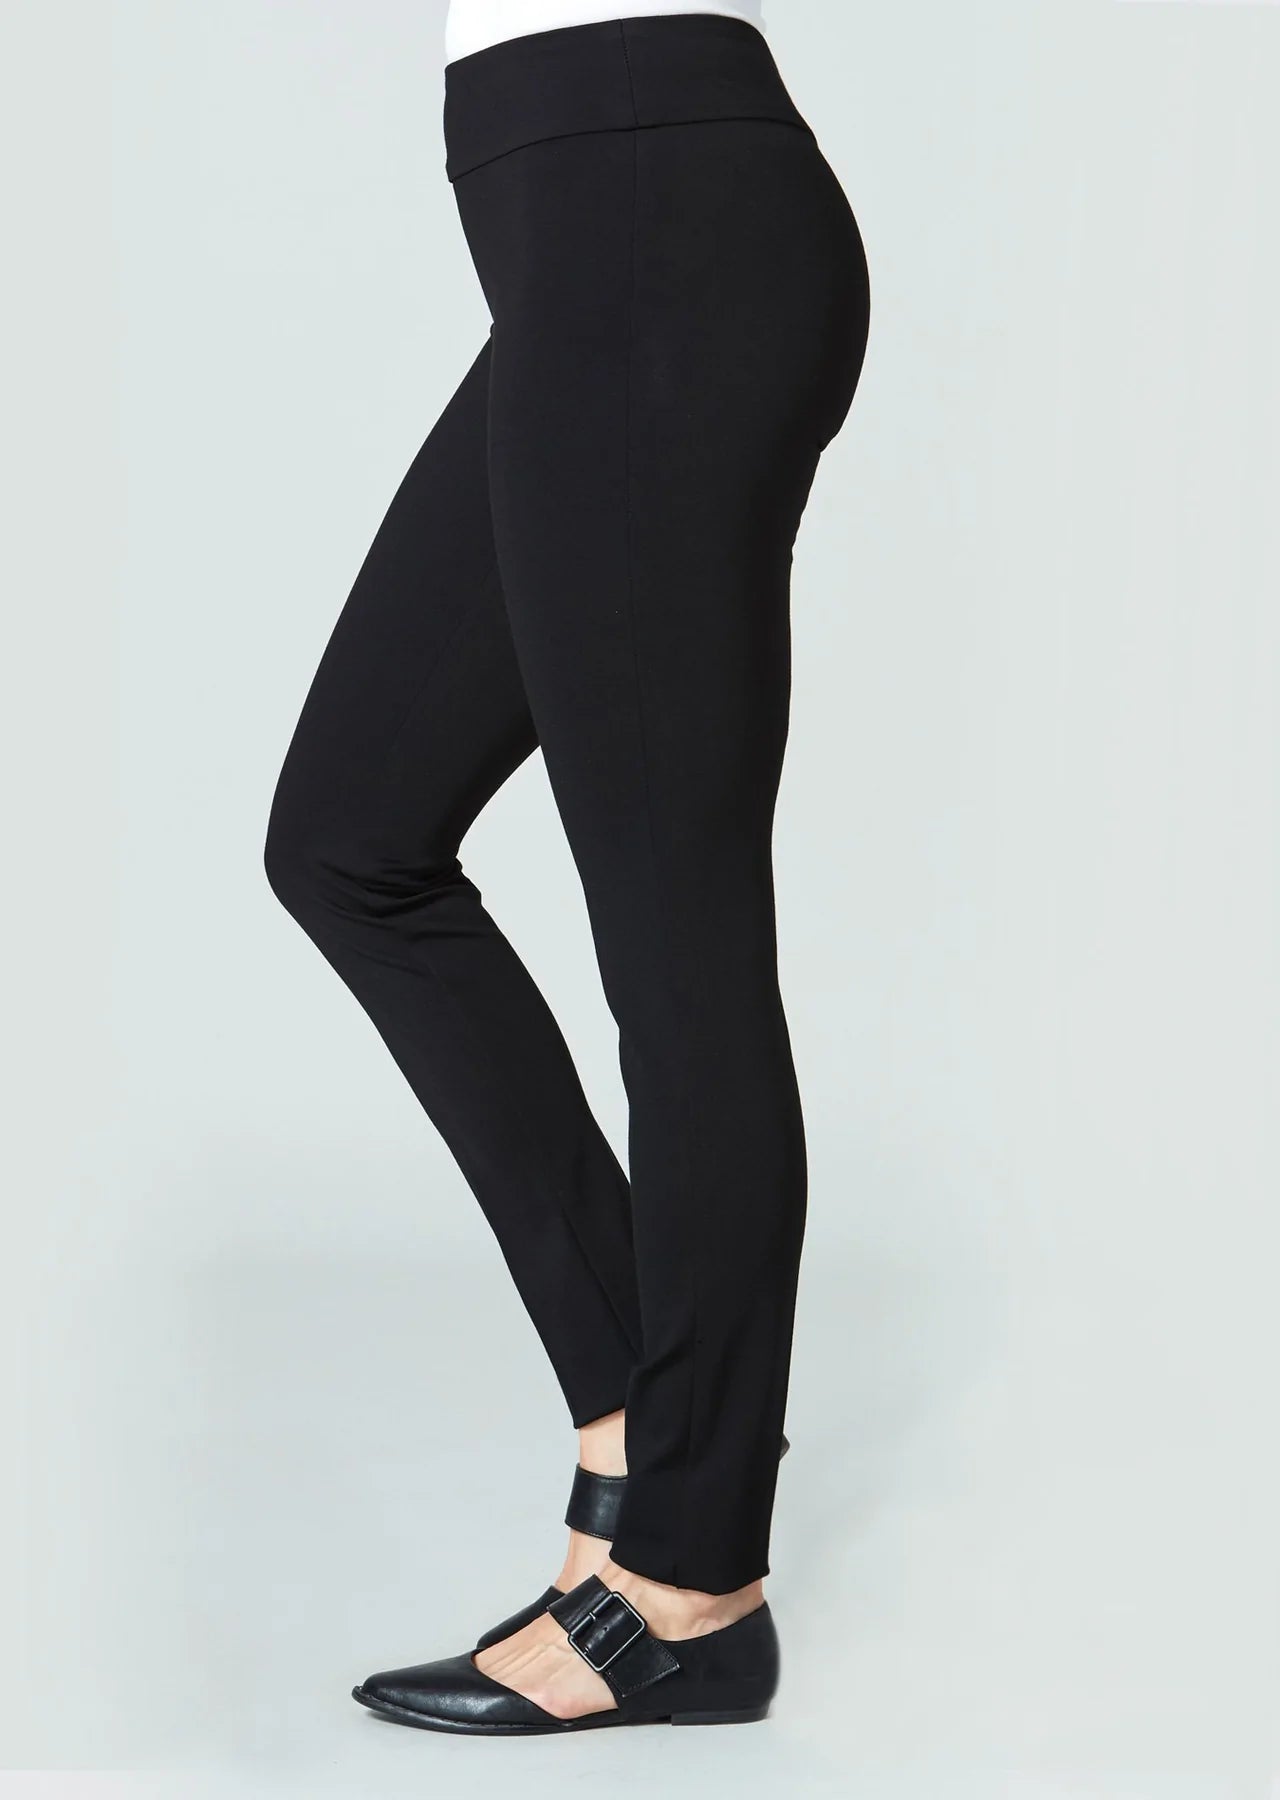 Essentials, Thinny Pants, Hollywood, Style 2544 Lisette L